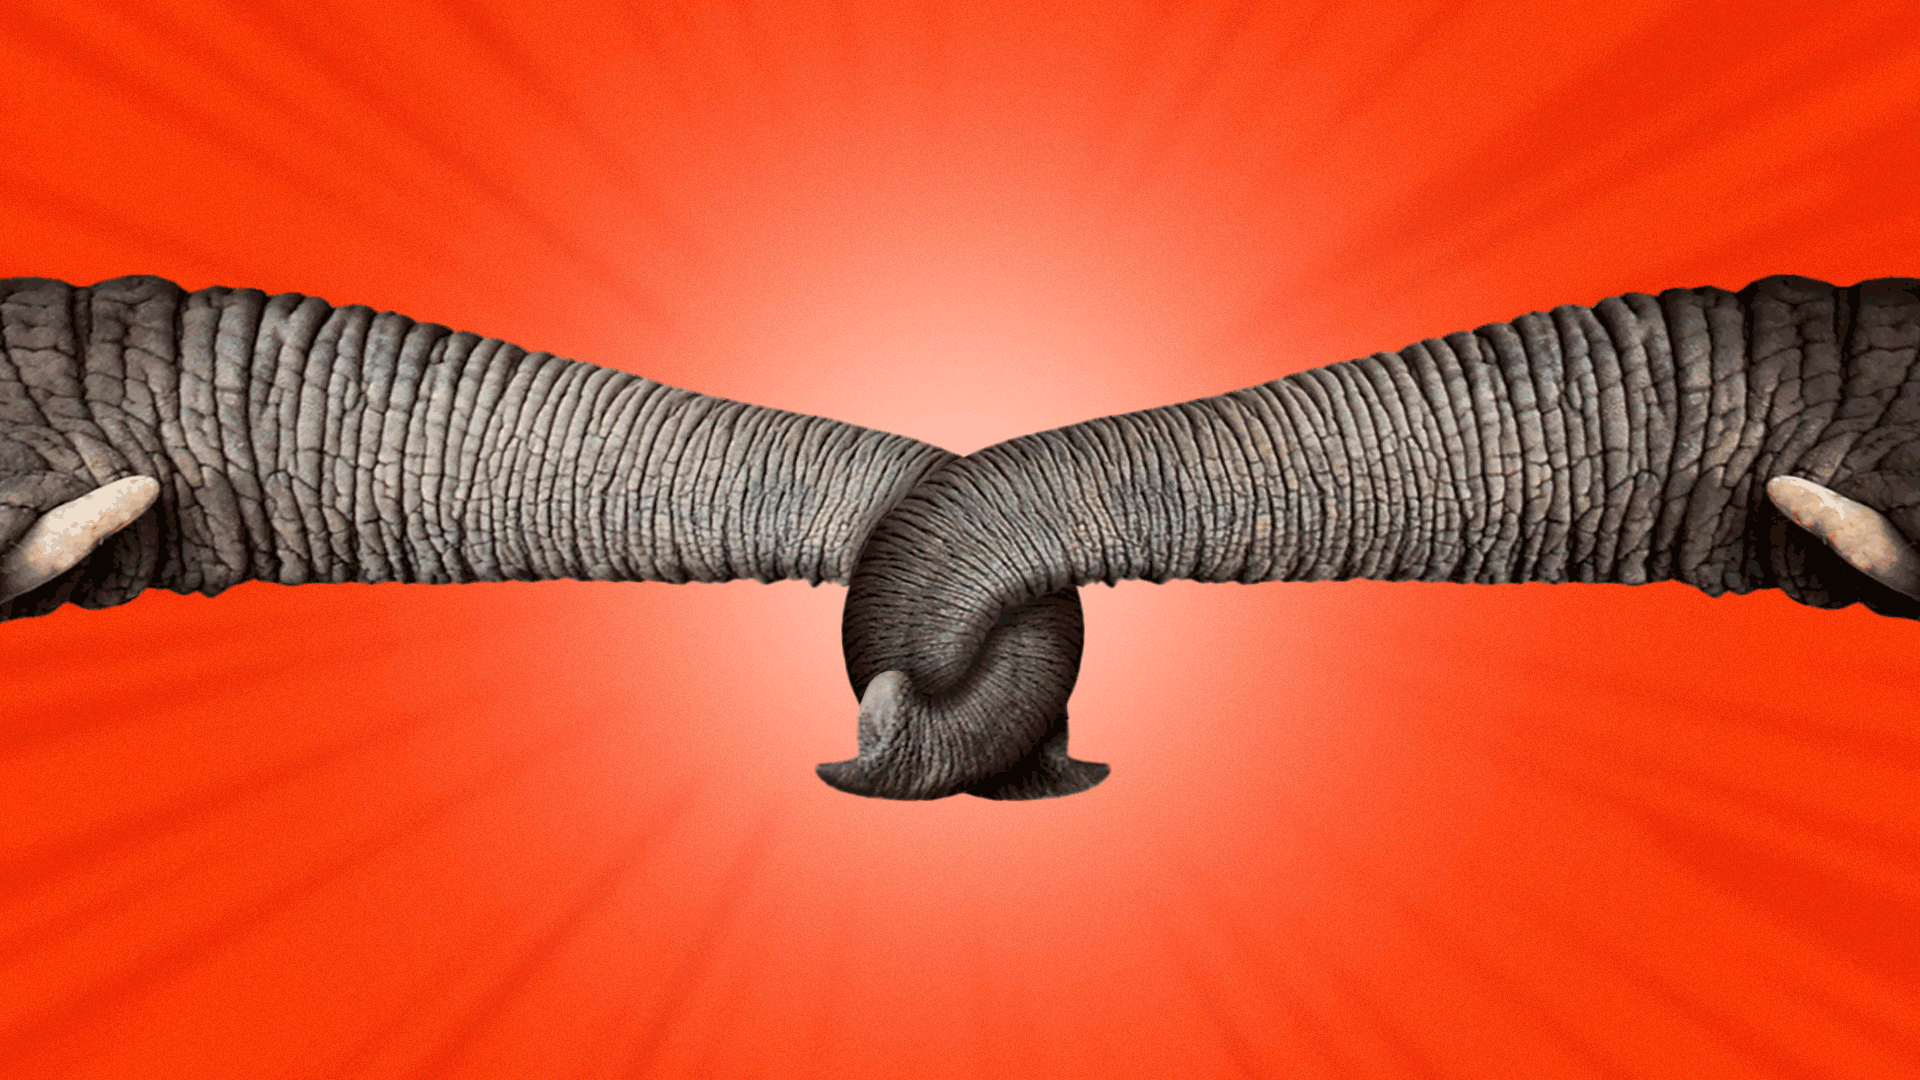 Animated gif of two elephants involved in a tug of war with their trunks